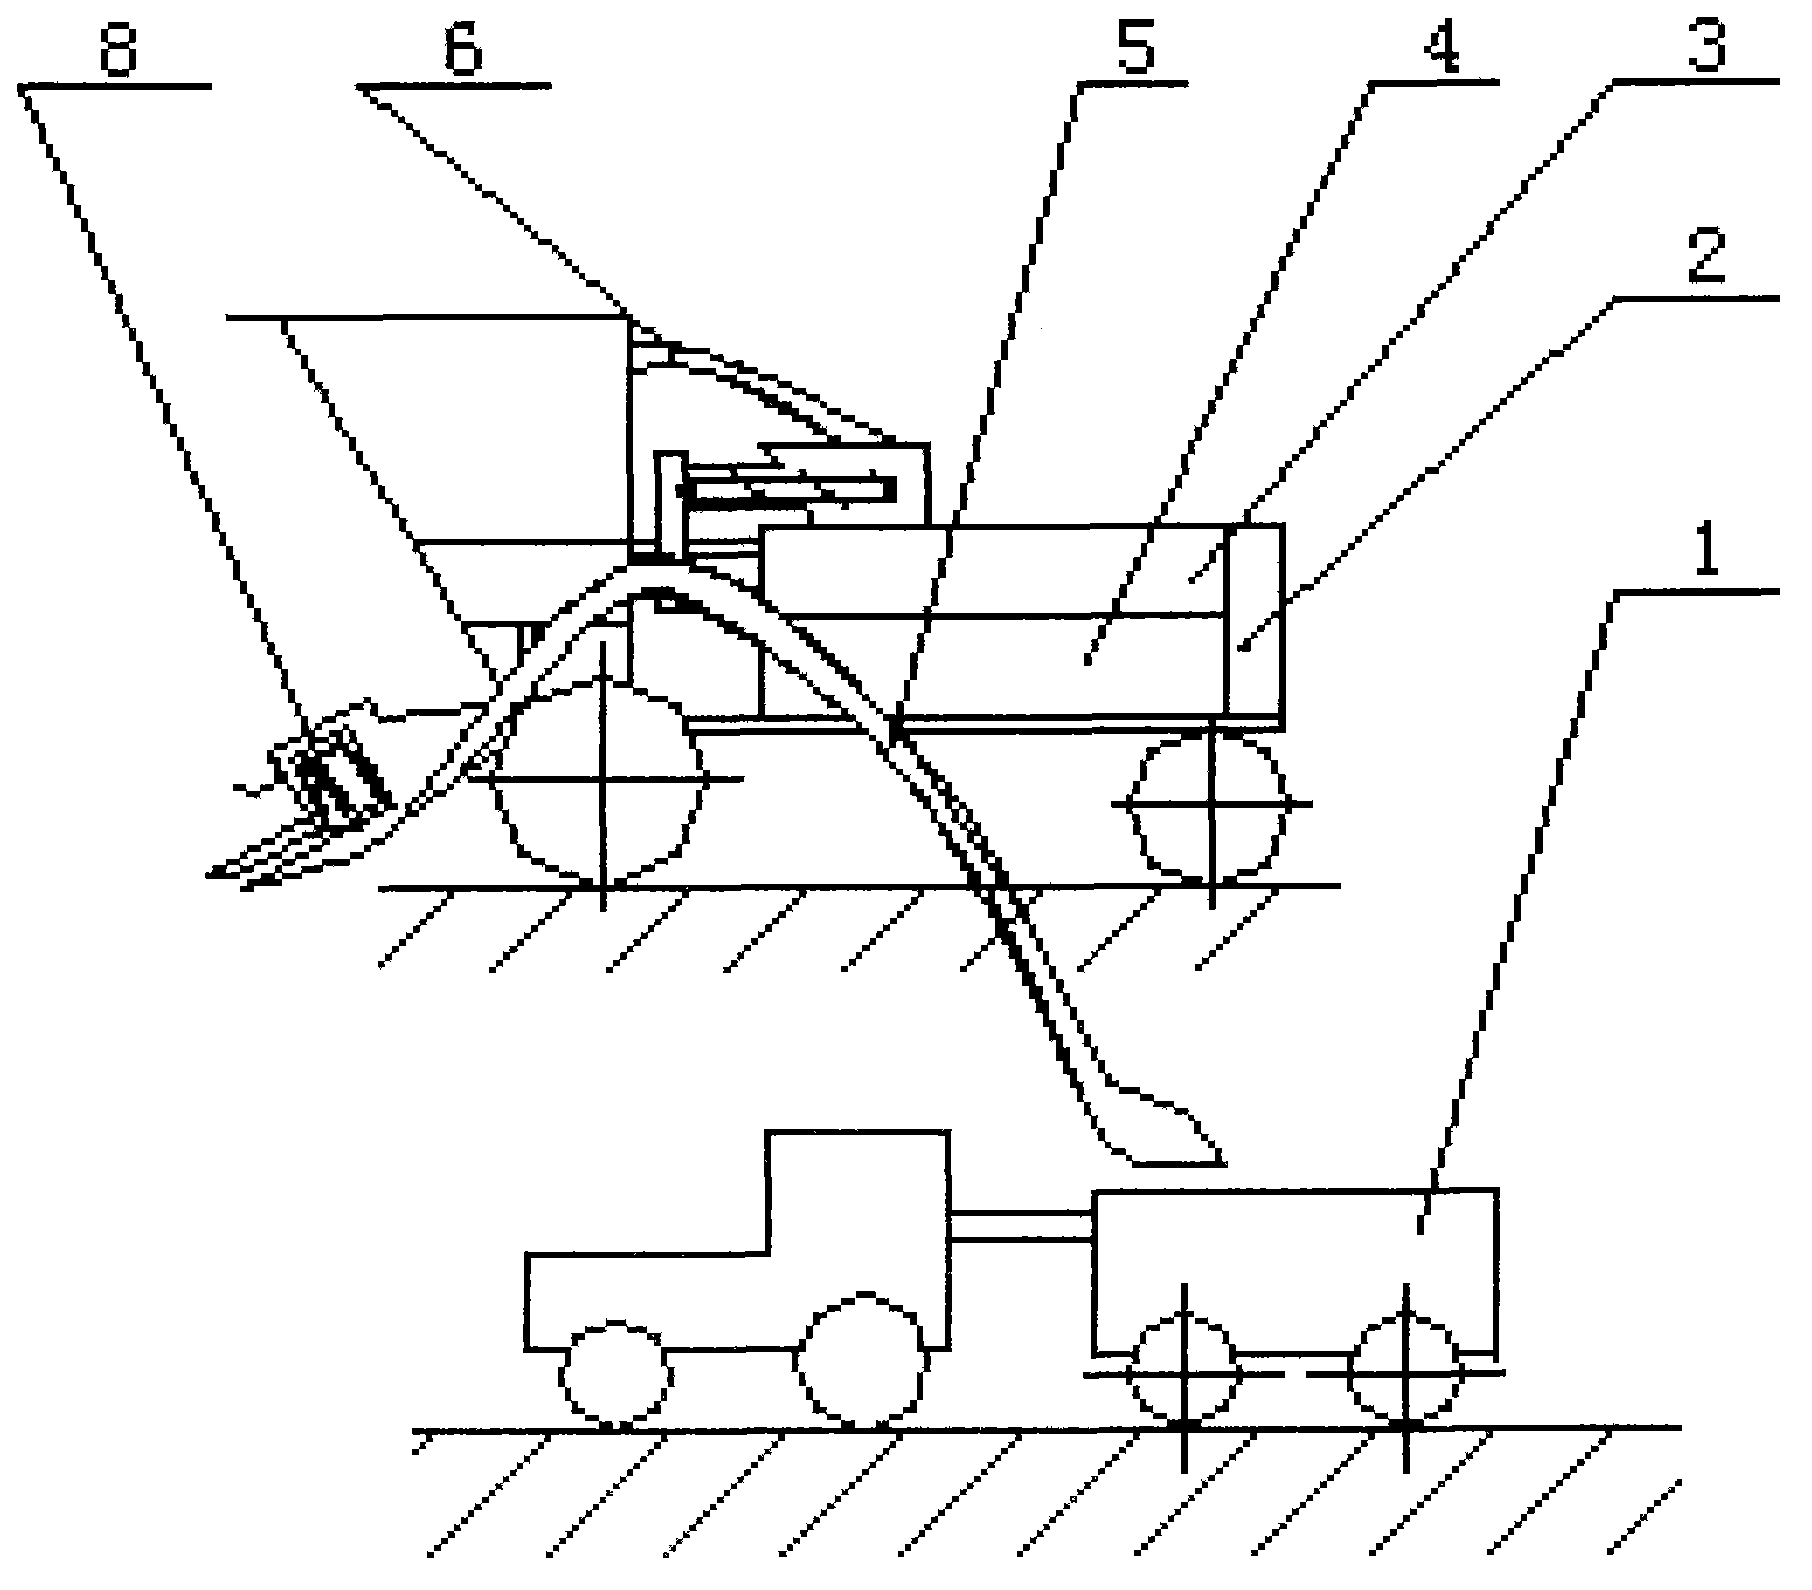 Self-propelled combine corn harvester for harvesting spike or seed, collecting straws and juicing